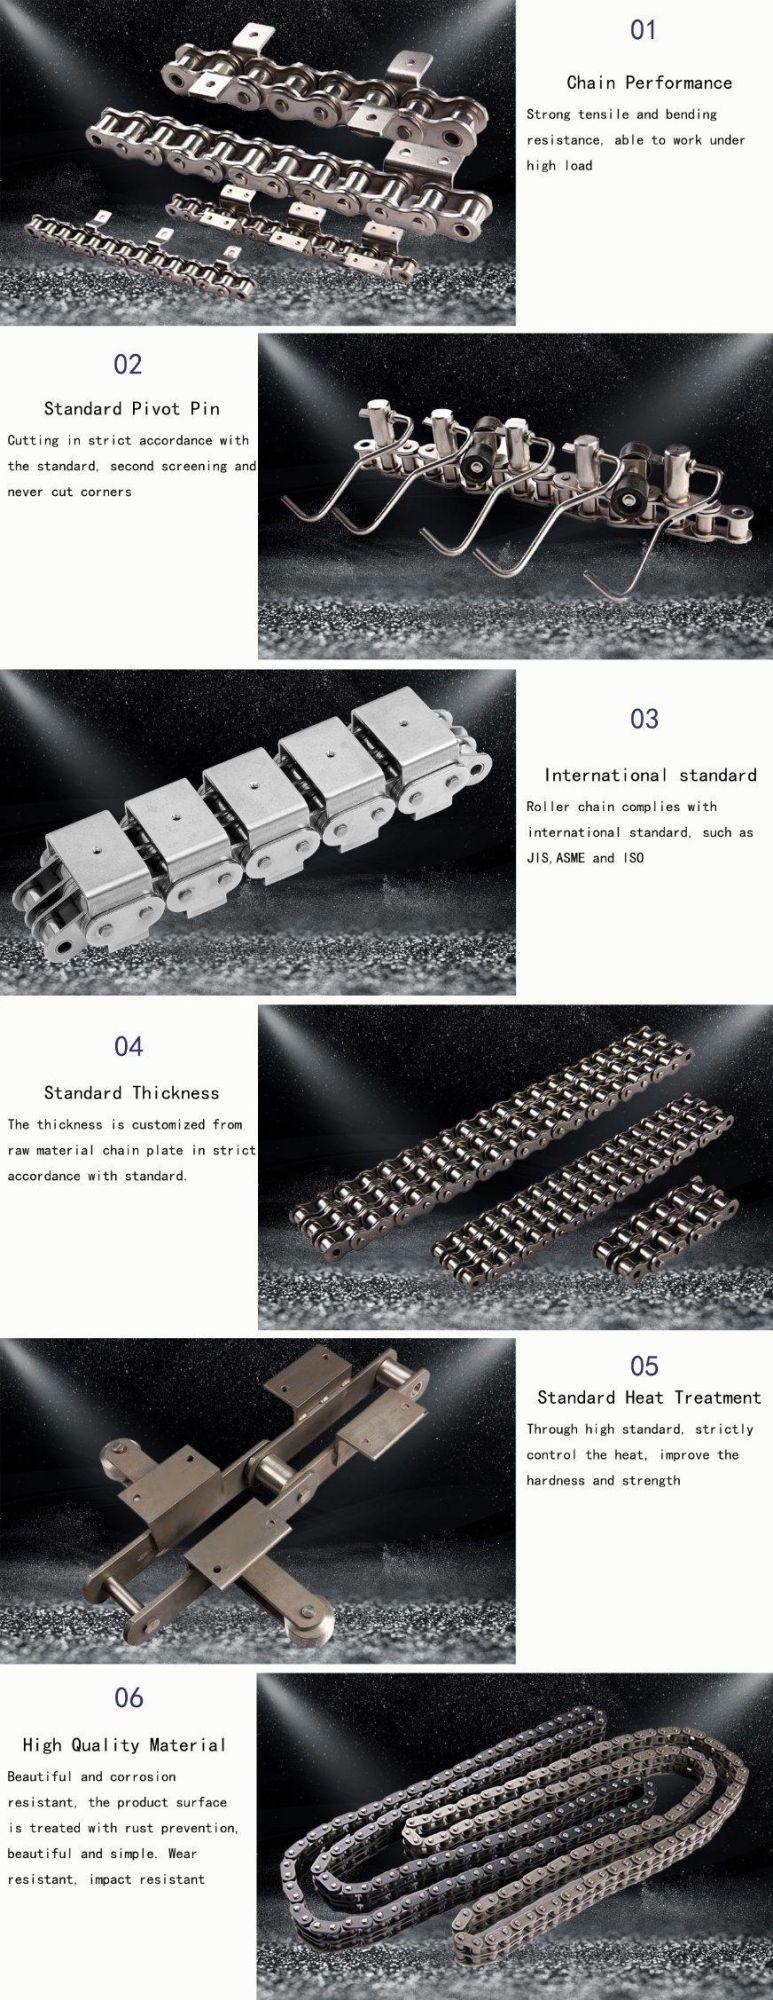 New Short Pitch Metal Roller Chain Transmission Roller Chain Conveyor Chain with Wa1 & Wa2 & Wk1 & Wk2 Attachment